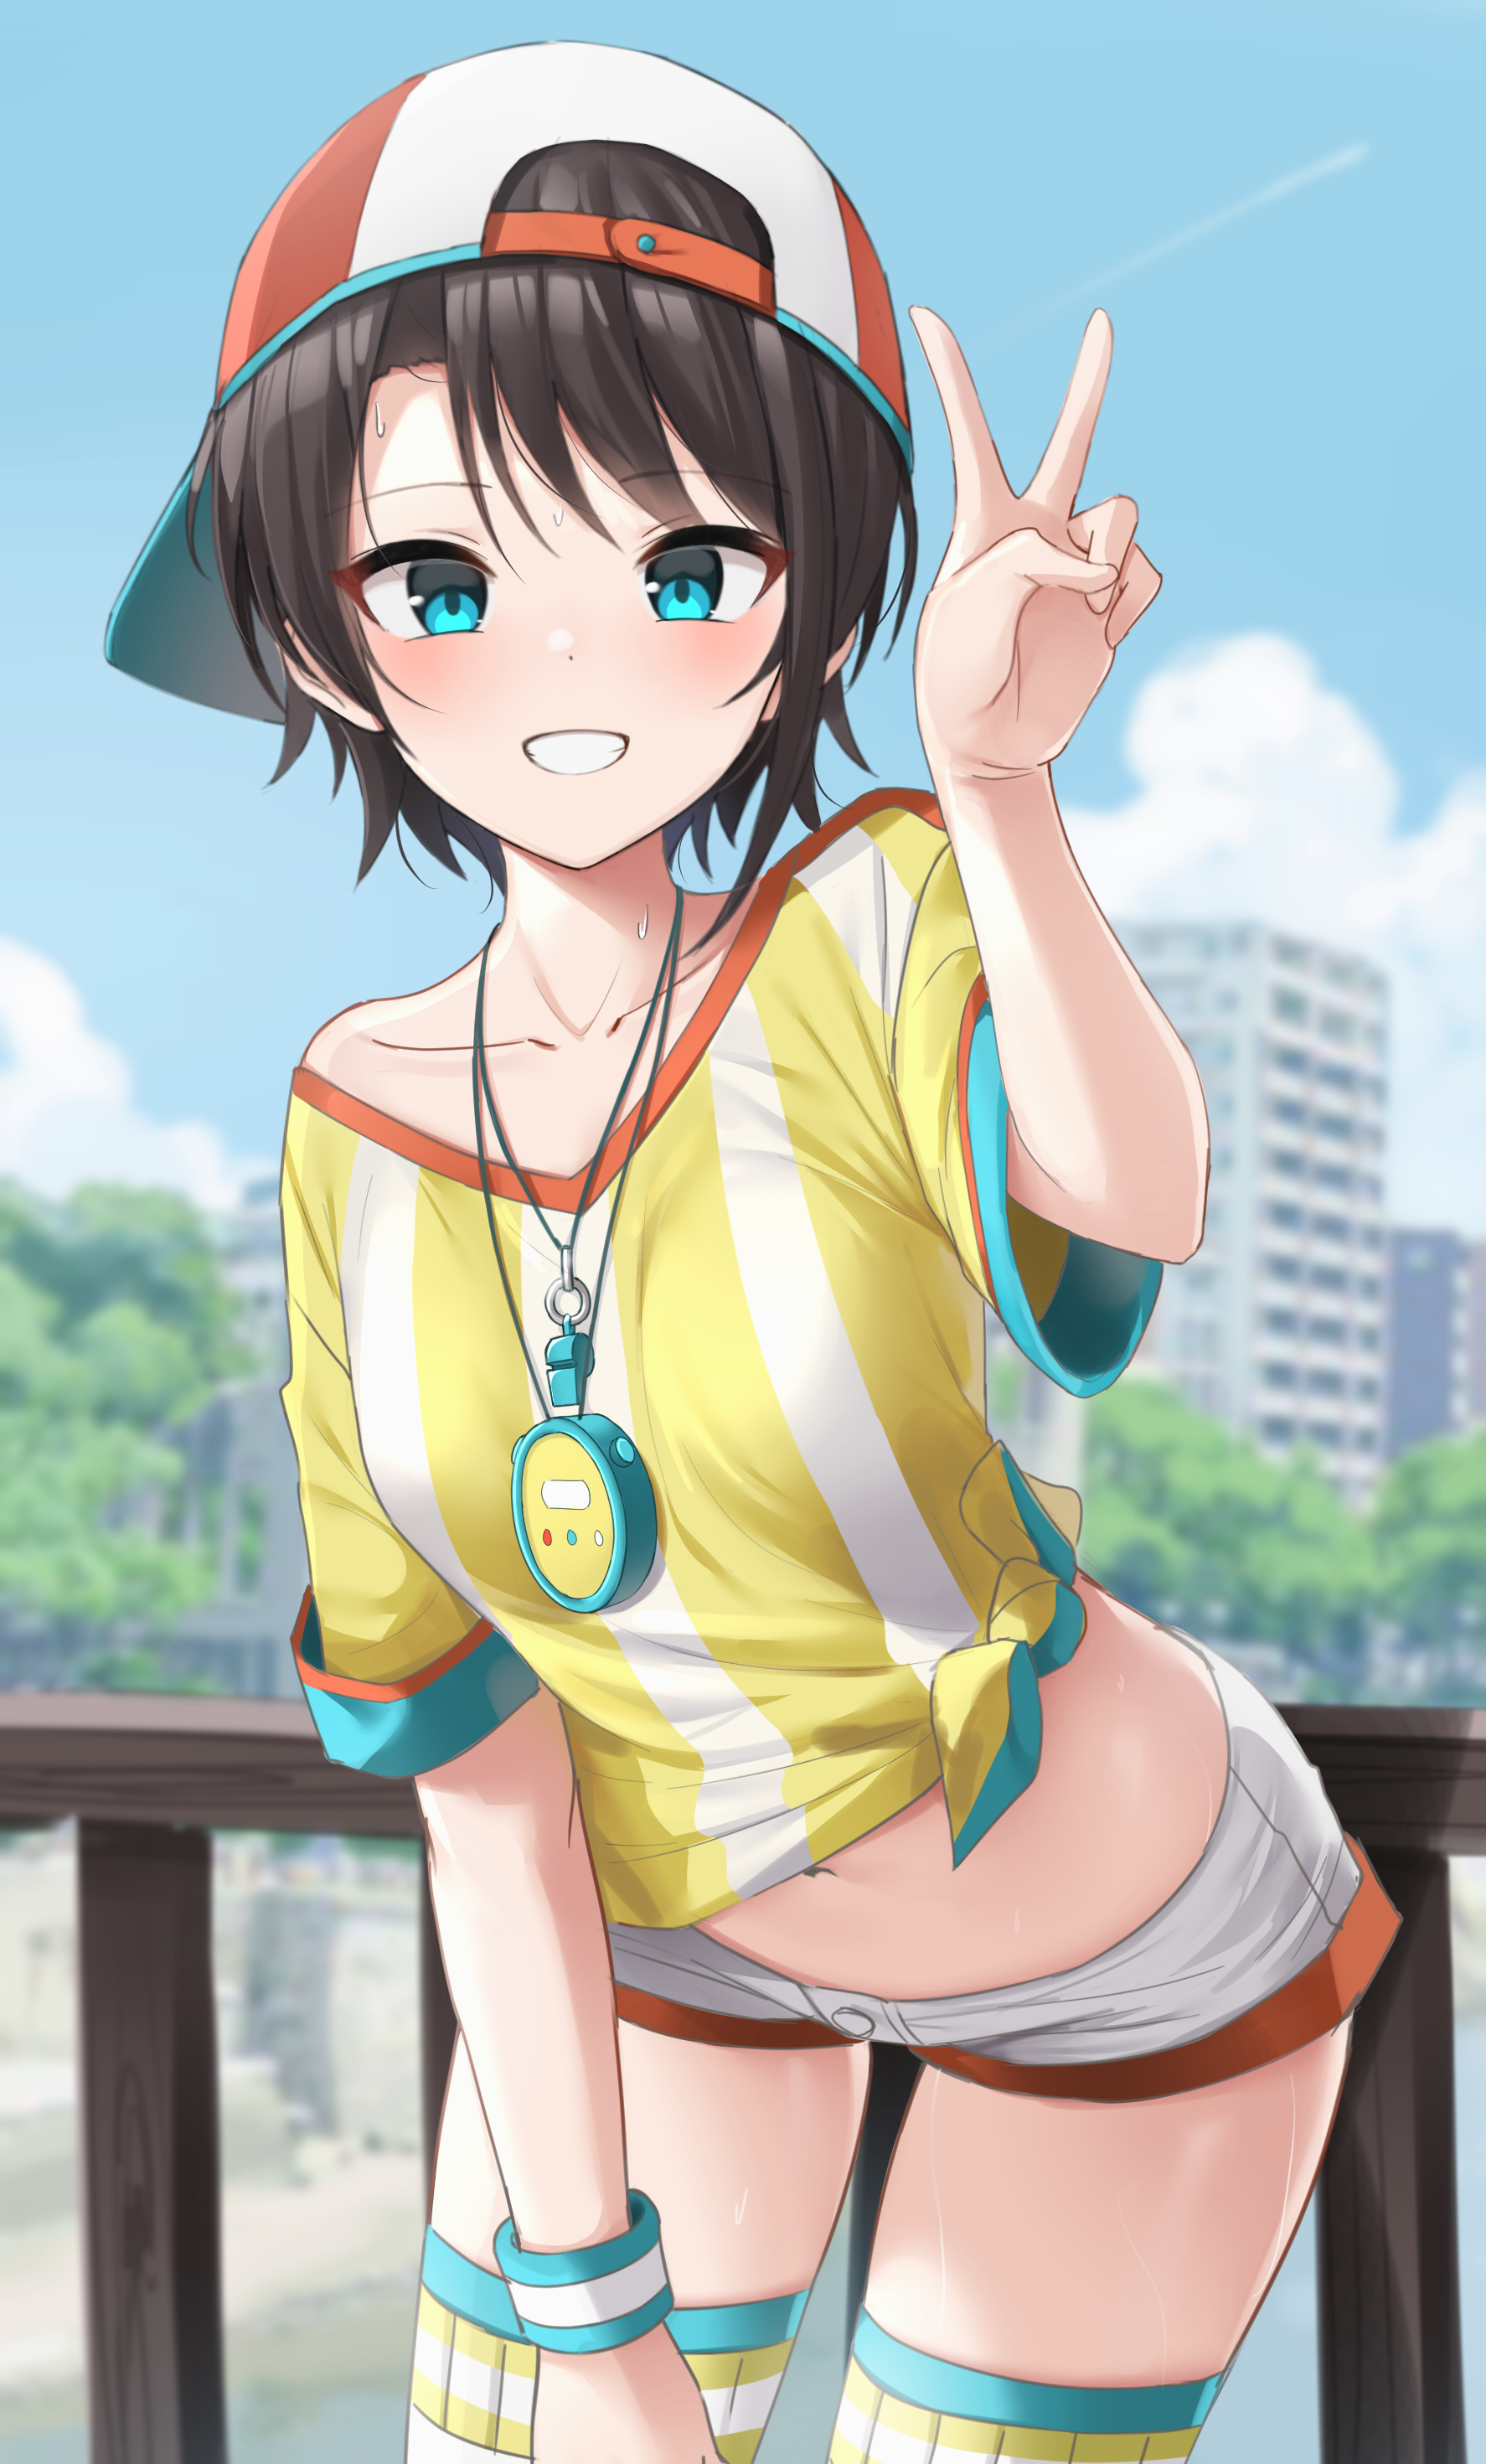 Anime 1774x2941 2D anime anime girls digital art Pixiv brunette blue eyes yellow shirt Stopwatch short shorts looking at viewer peace sign knee high socks wristband tied top belly belly button Oozora Subaru